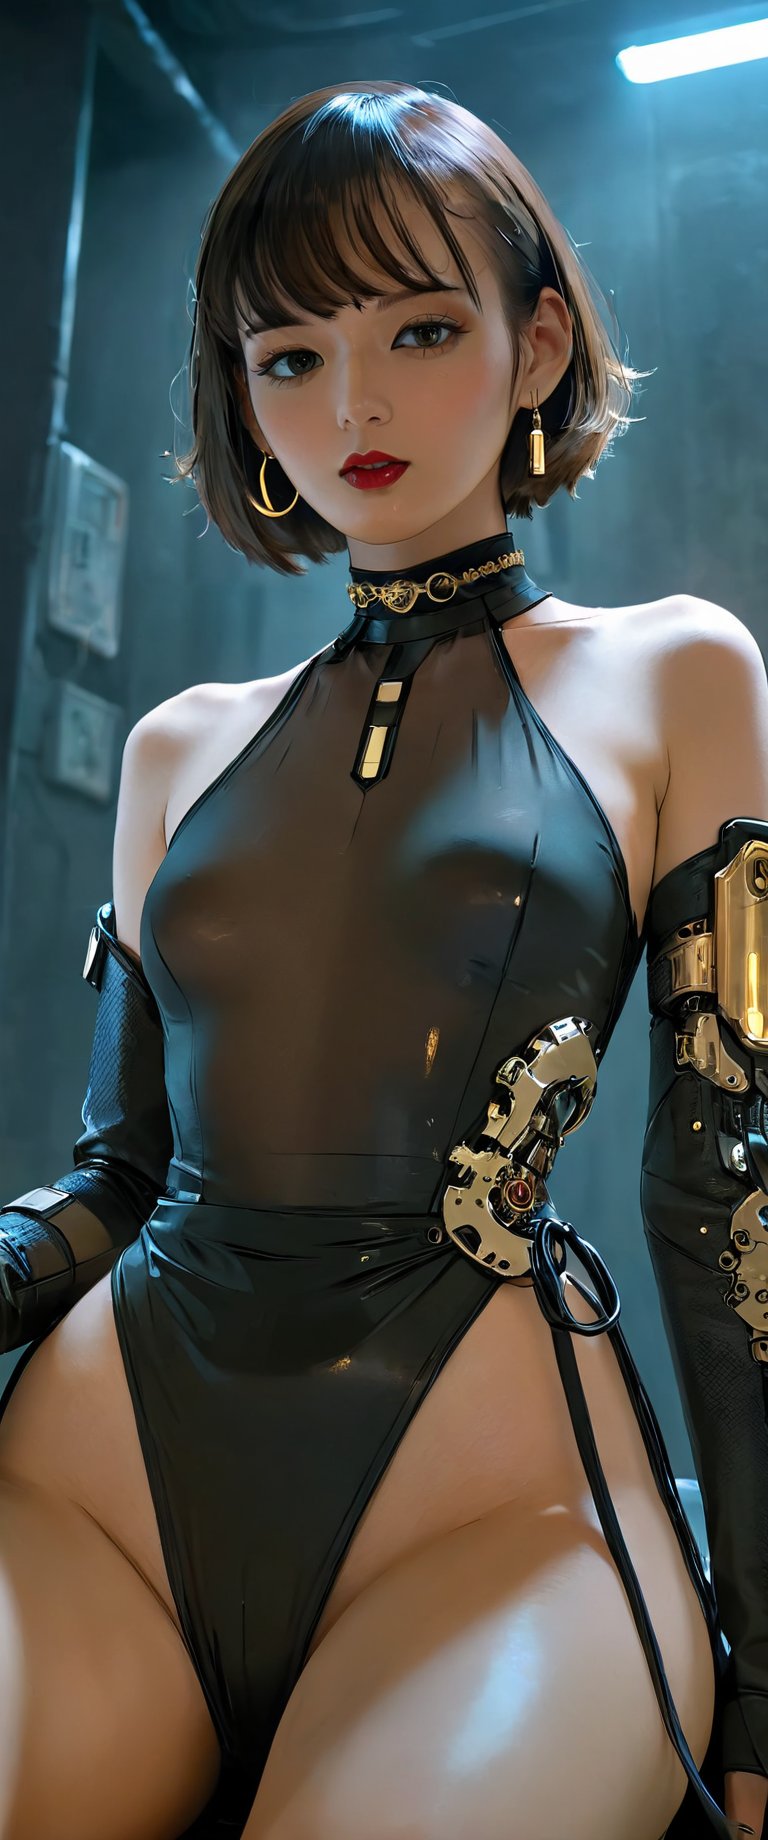 In a dimly lit, smoky cyberpunk club, a femme fatale cyborg sits solo, her mechanical joints gleaming in the flickering light. Her striking features, framed by short hair and bangs, are adorned with jewelry and a black choker. A cigarette dangles from her lips as she pets a snake that gazes directly at the viewer. She wears a revealing seethrough kimono, paired with Japanese-style earrings, and holds a katana surrounded by the dark, gritty atmosphere. Her gaze is sultry, exuding an air of sexy sophistication, as if inviting the viewer to enter her world. The scene is set in a Conrad Roset-inspired style, with a focus on dark, muted tones and industrial textures.,core_9,scary,BG